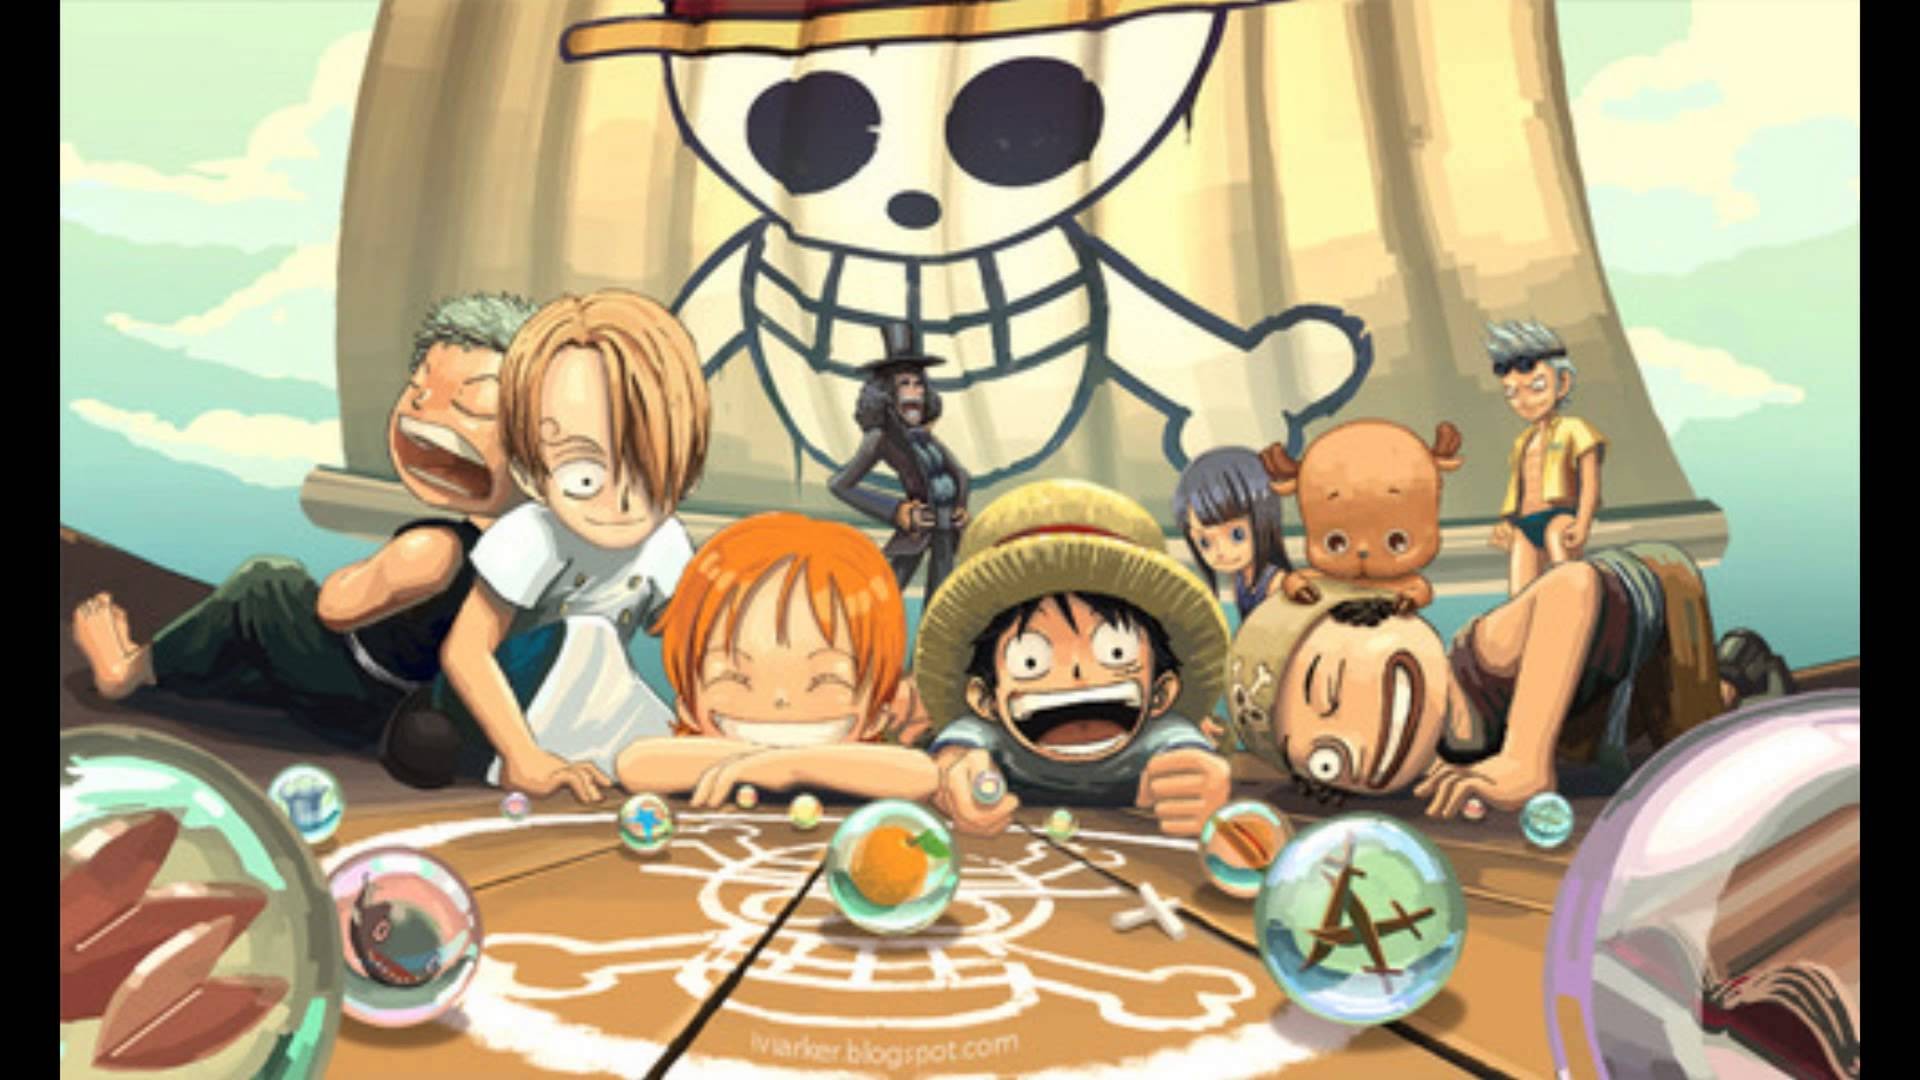 one piece wallpaper hd for android,animated cartoon,cartoon,illustration,animation,adventure game